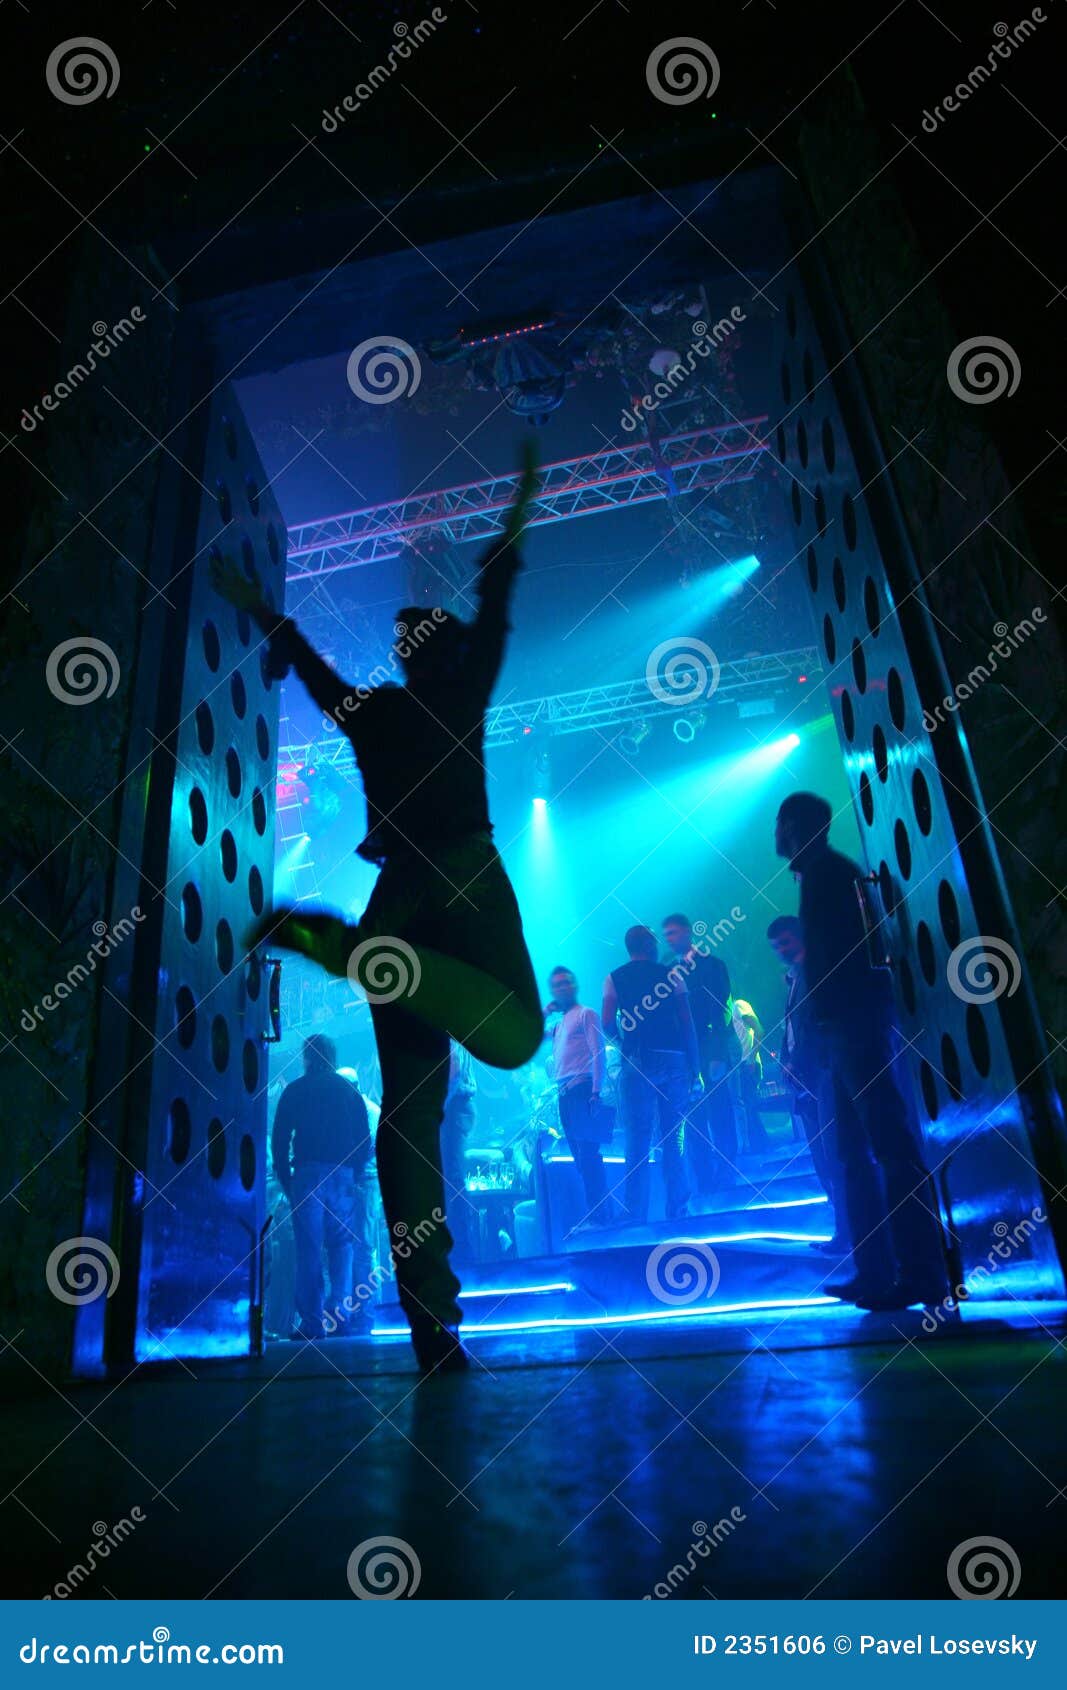 Enter to night club stock photo. Image of group, culture - 2351606